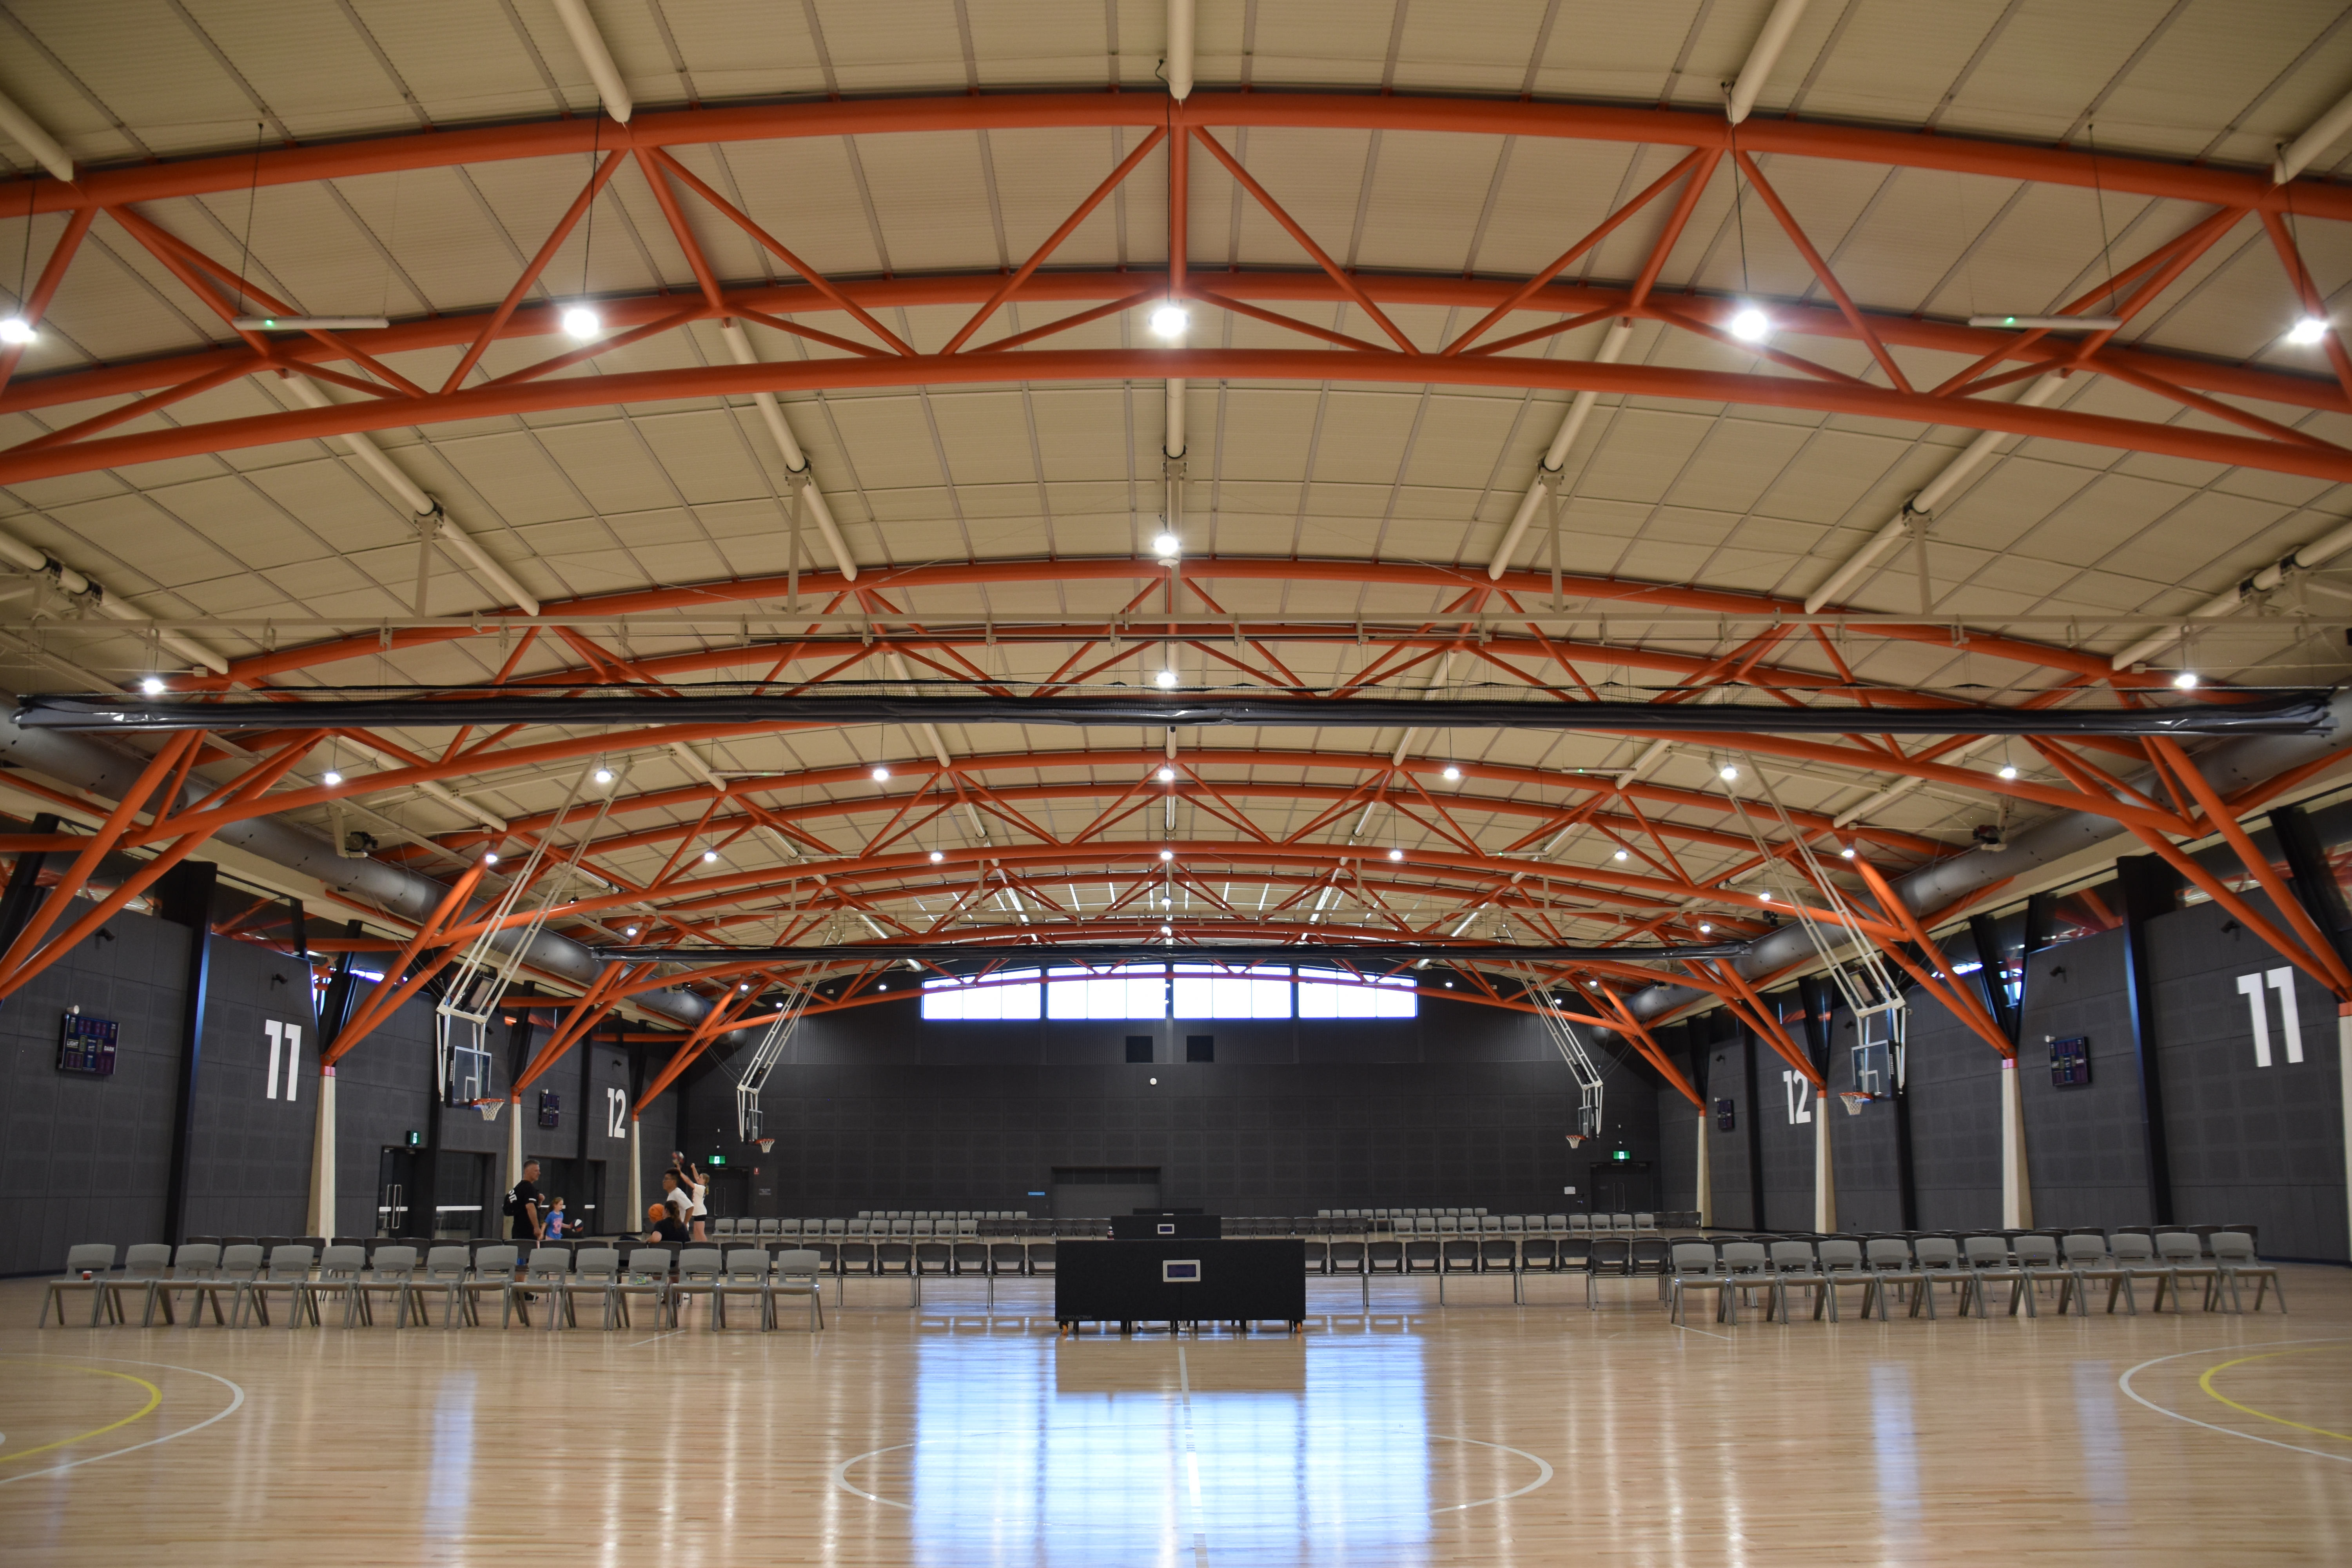 Multipurpose courts with rings, nets and seating